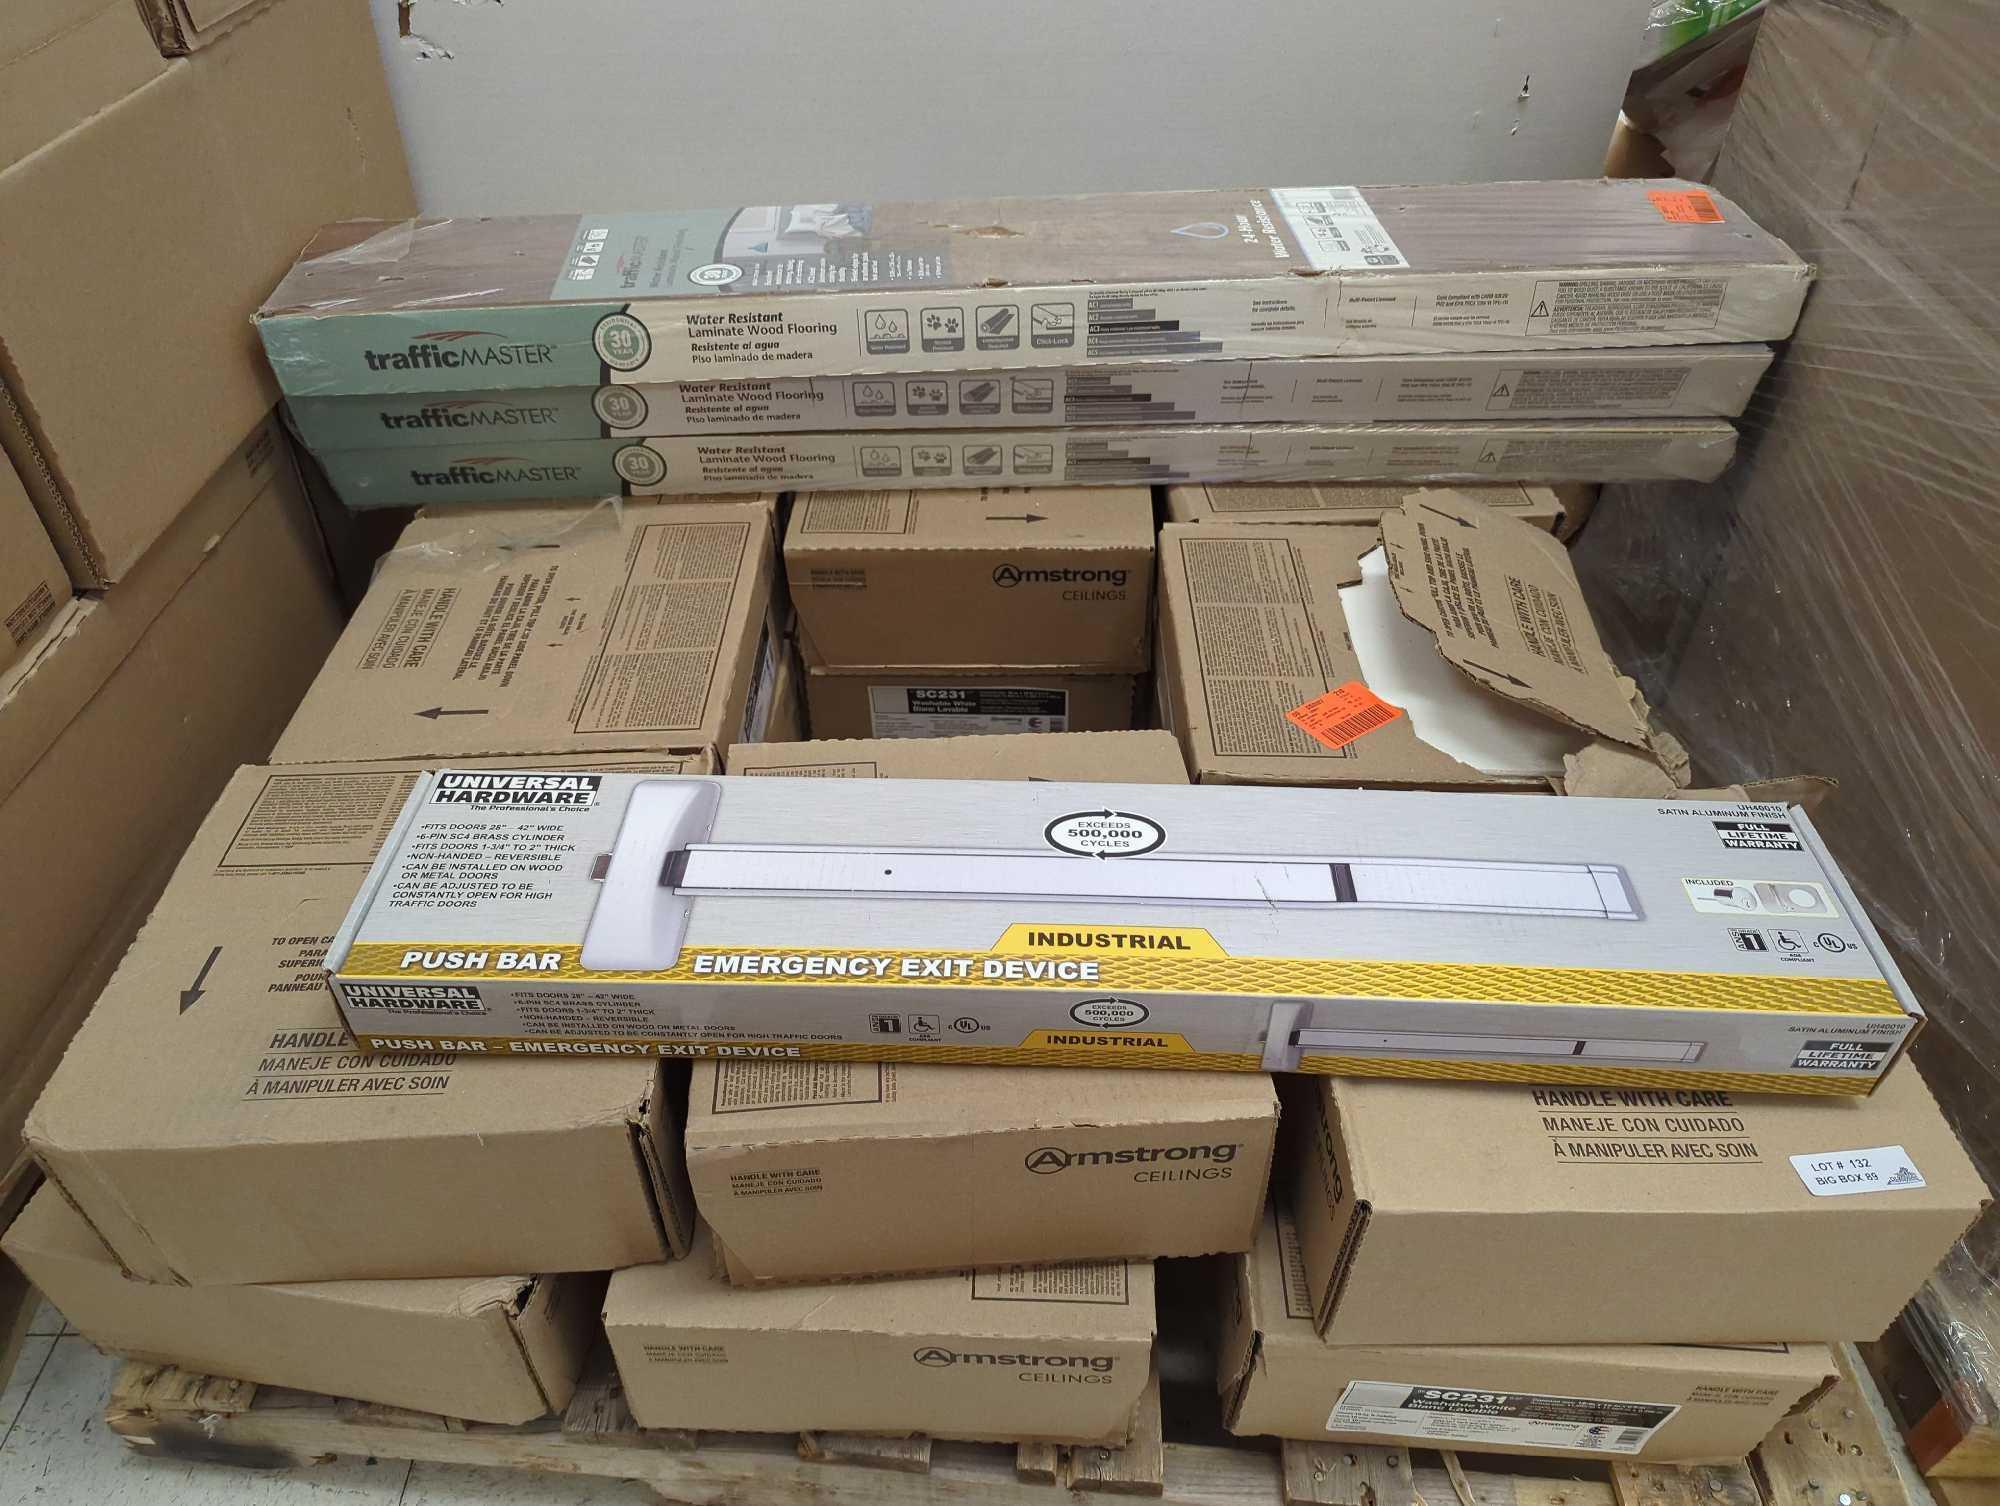 Pallet Lot of Assorted Items to Include, Universal Hardware Push Bar Emergency Exit Device,